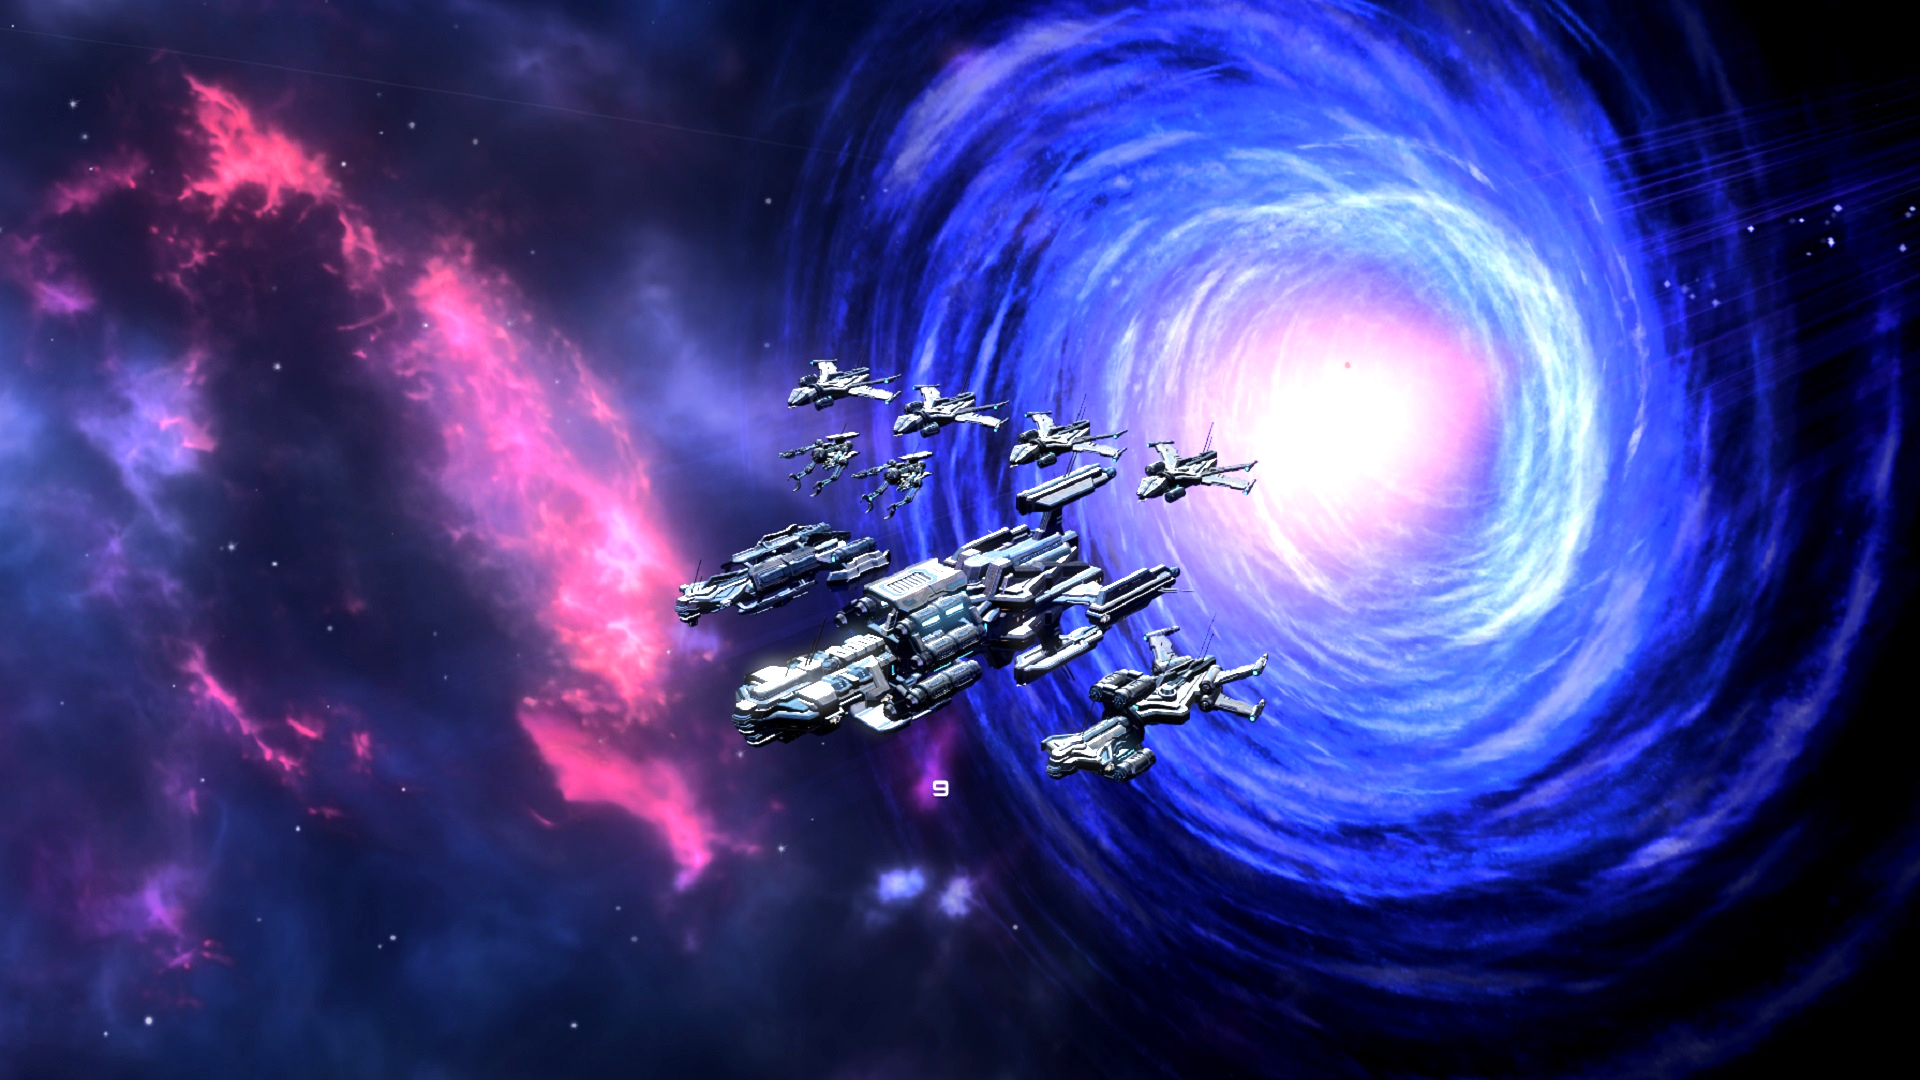 Galactic Civilizations IV's new update demands your loyalty